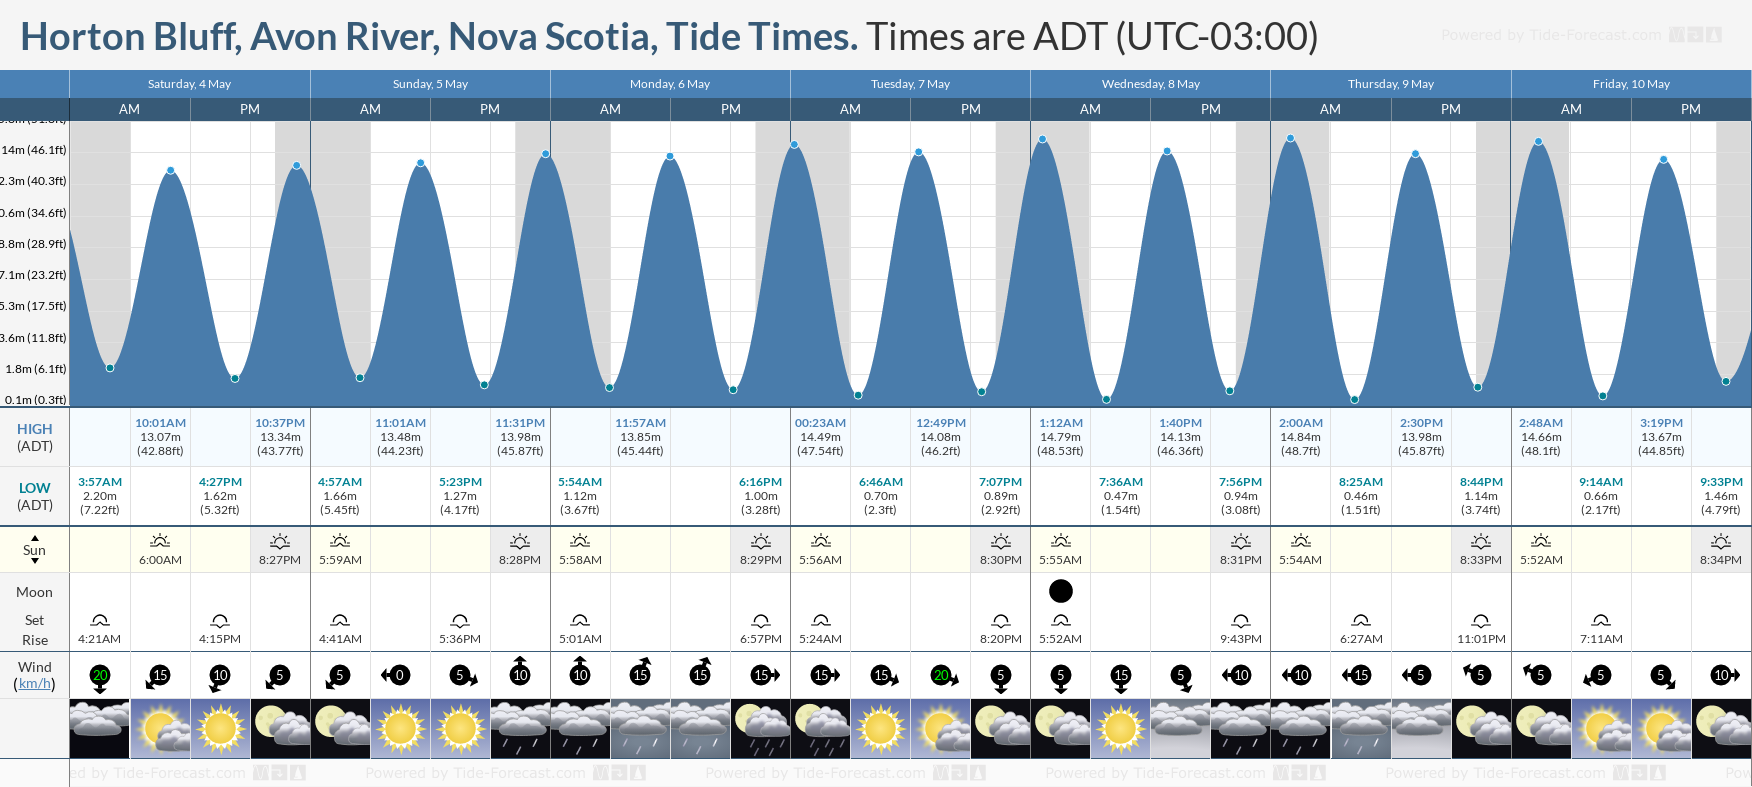 Horton Bluff, Avon River, Nova Scotia Tide Chart including high and low tide tide times for the next 7 days